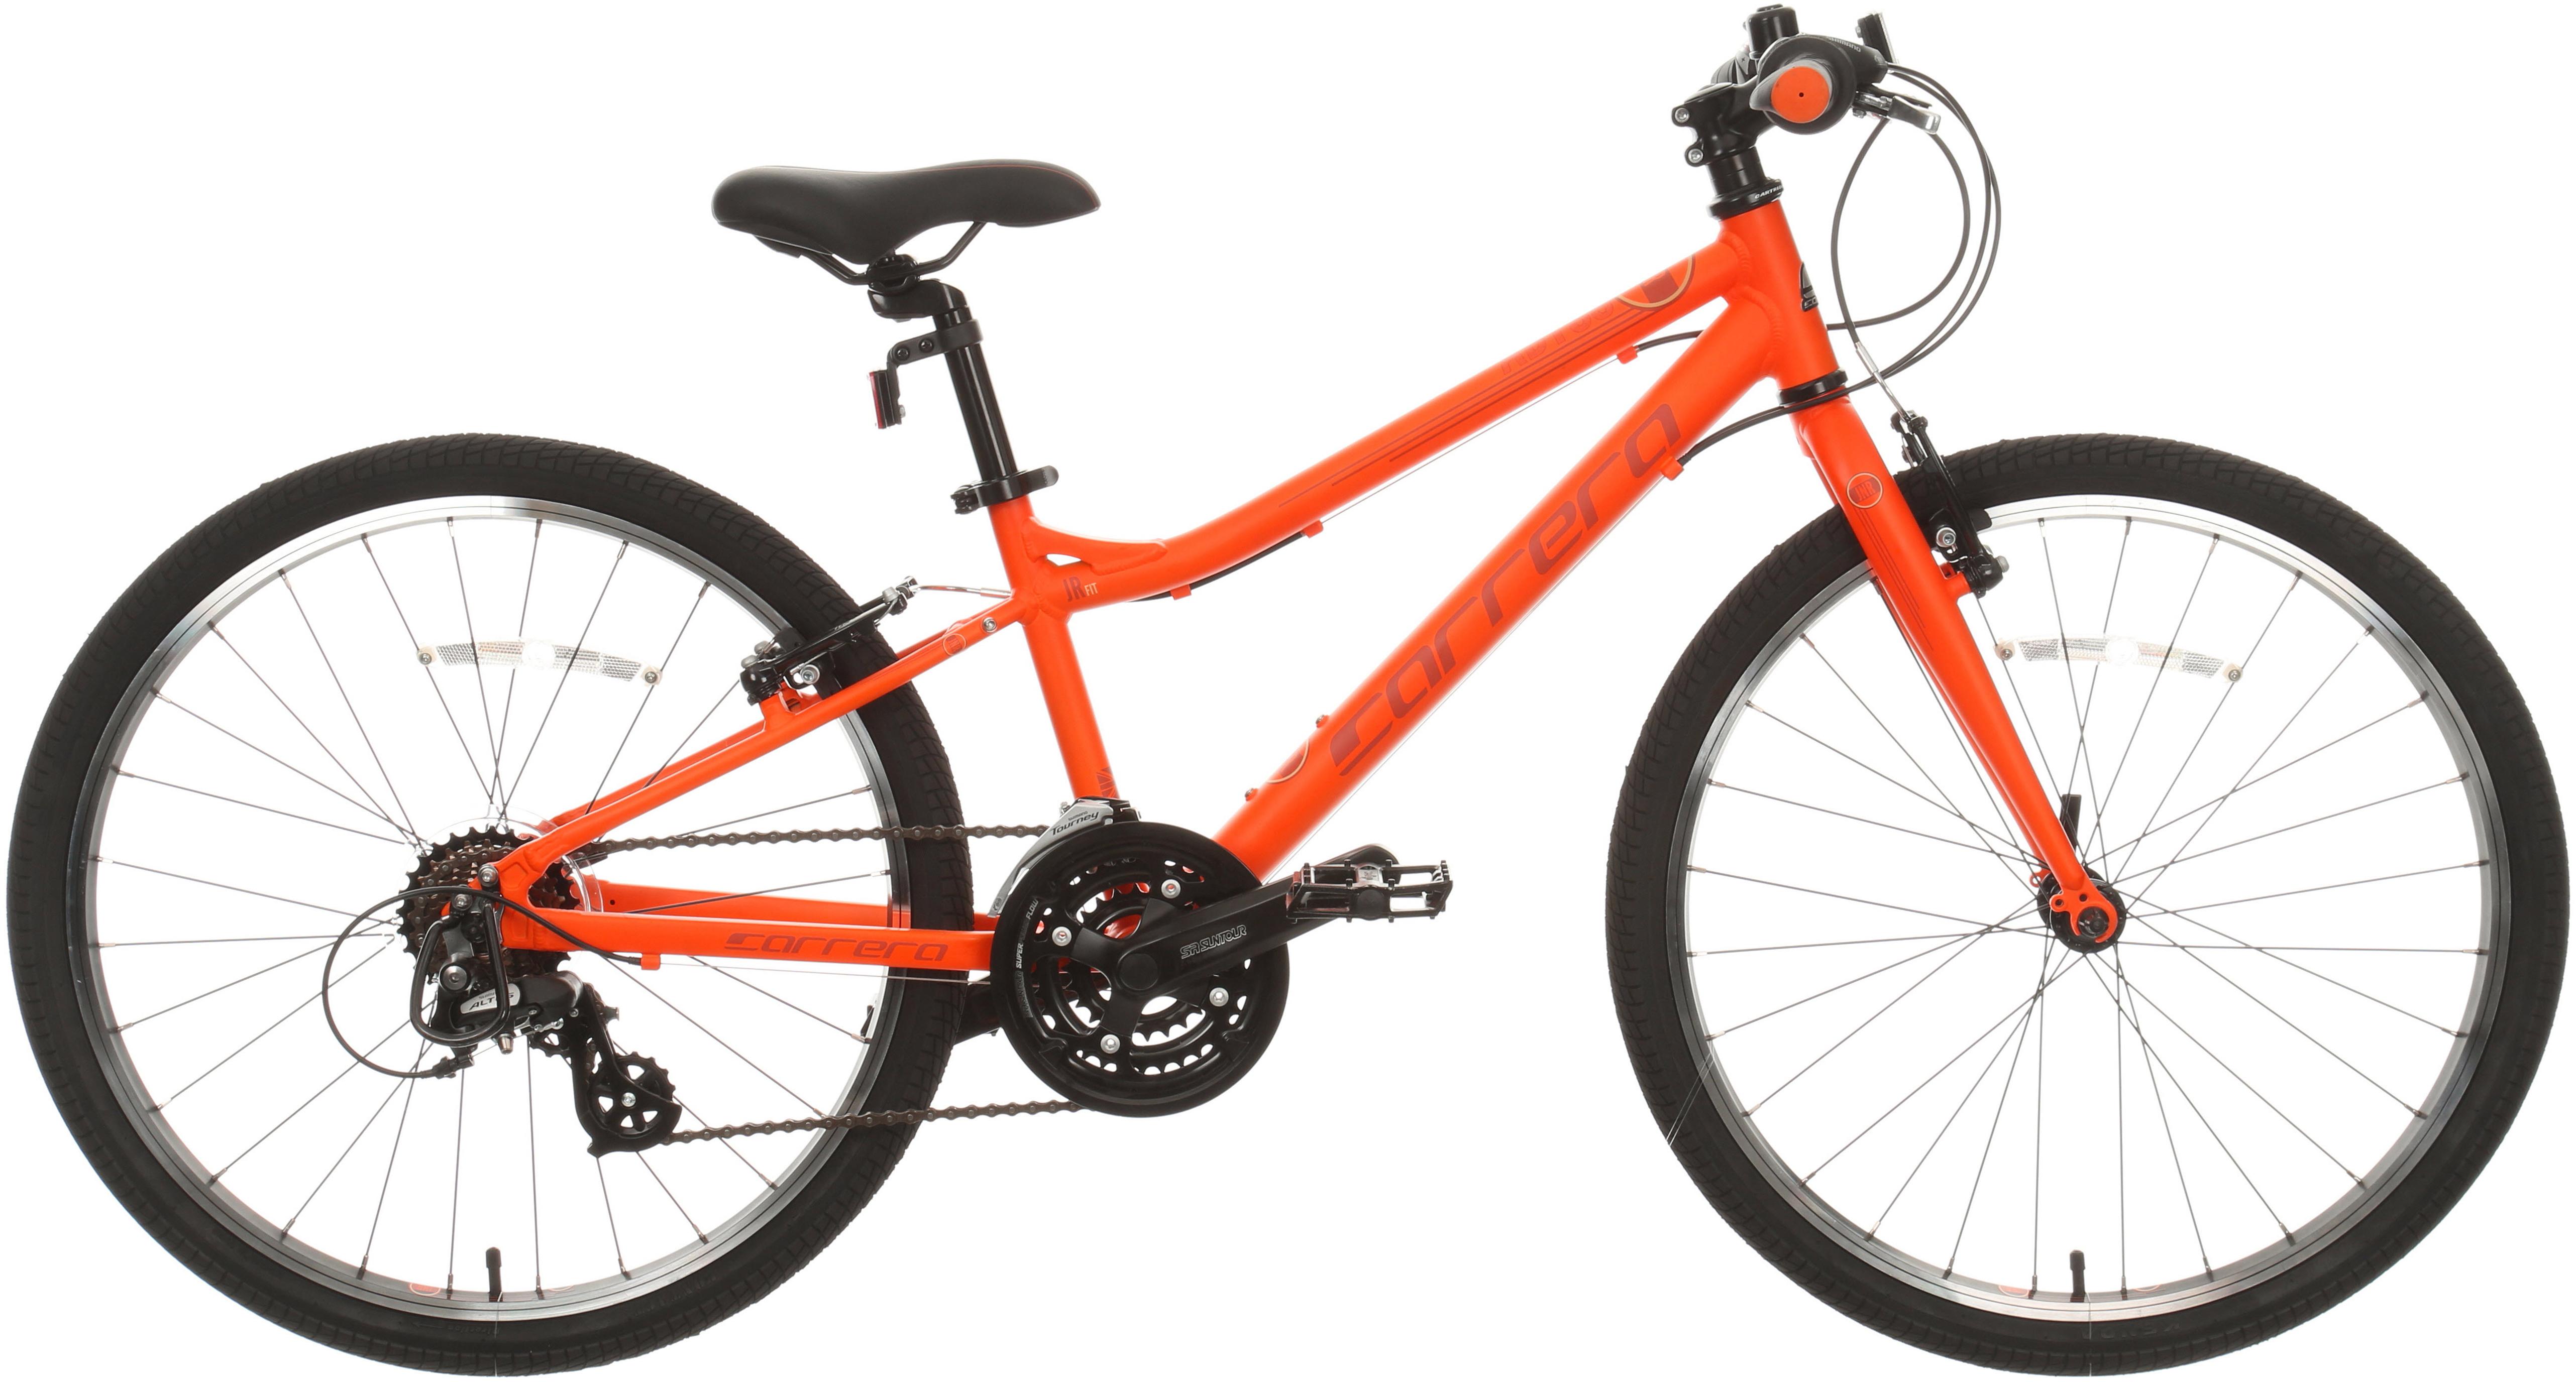 24 inch hybrid bicycle